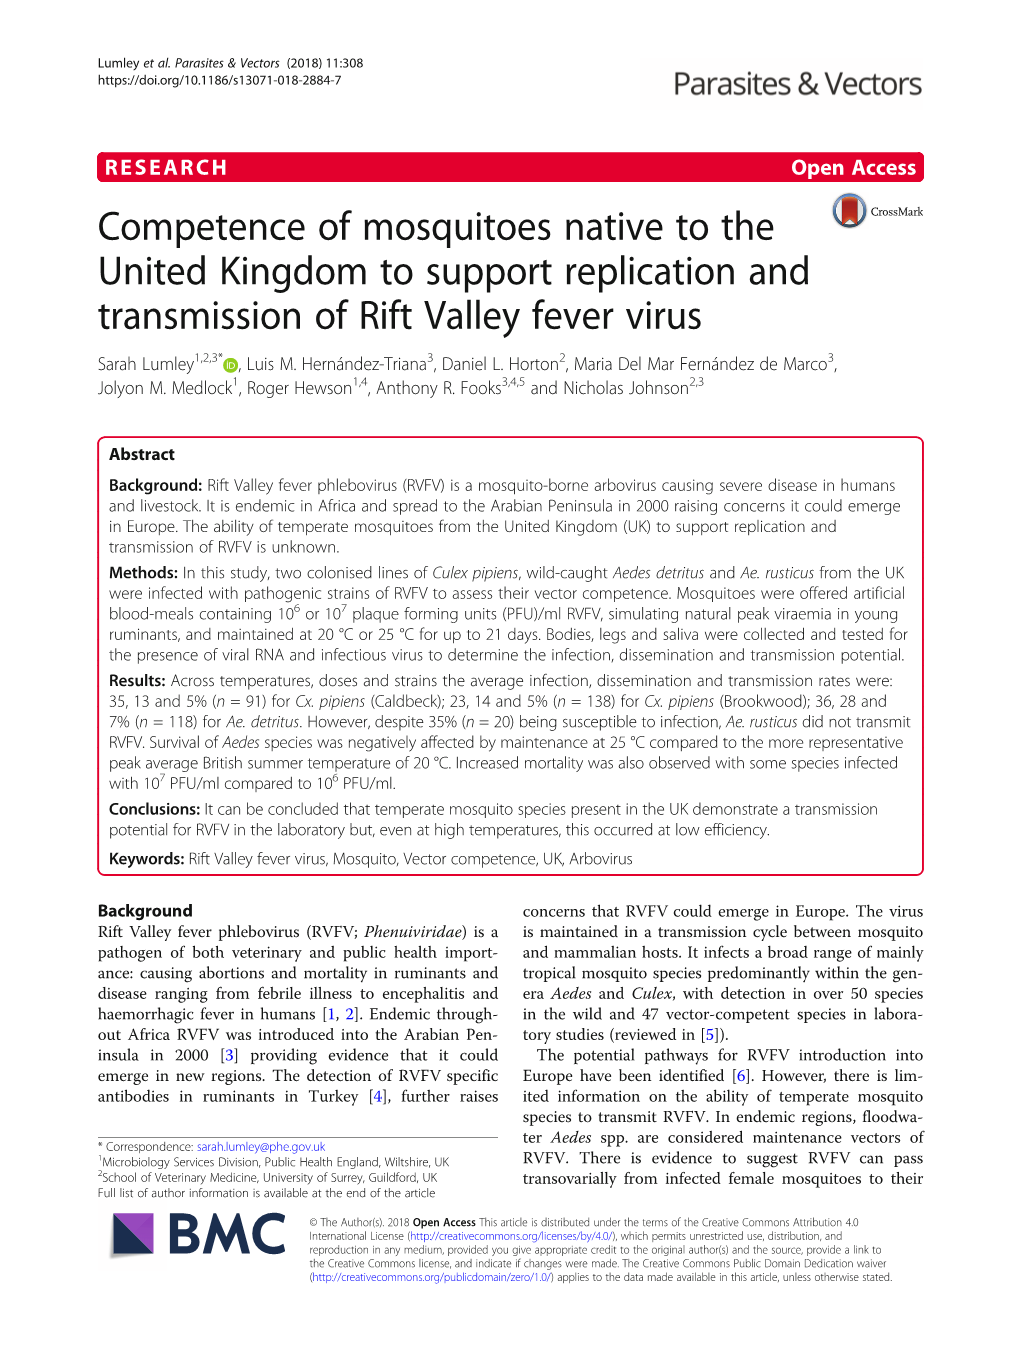 Competence of Mosquitoes Native to the United Kingdom to Support Replication and Transmission of Rift Valley Fever Virus Sarah Lumley1,2,3* , Luis M